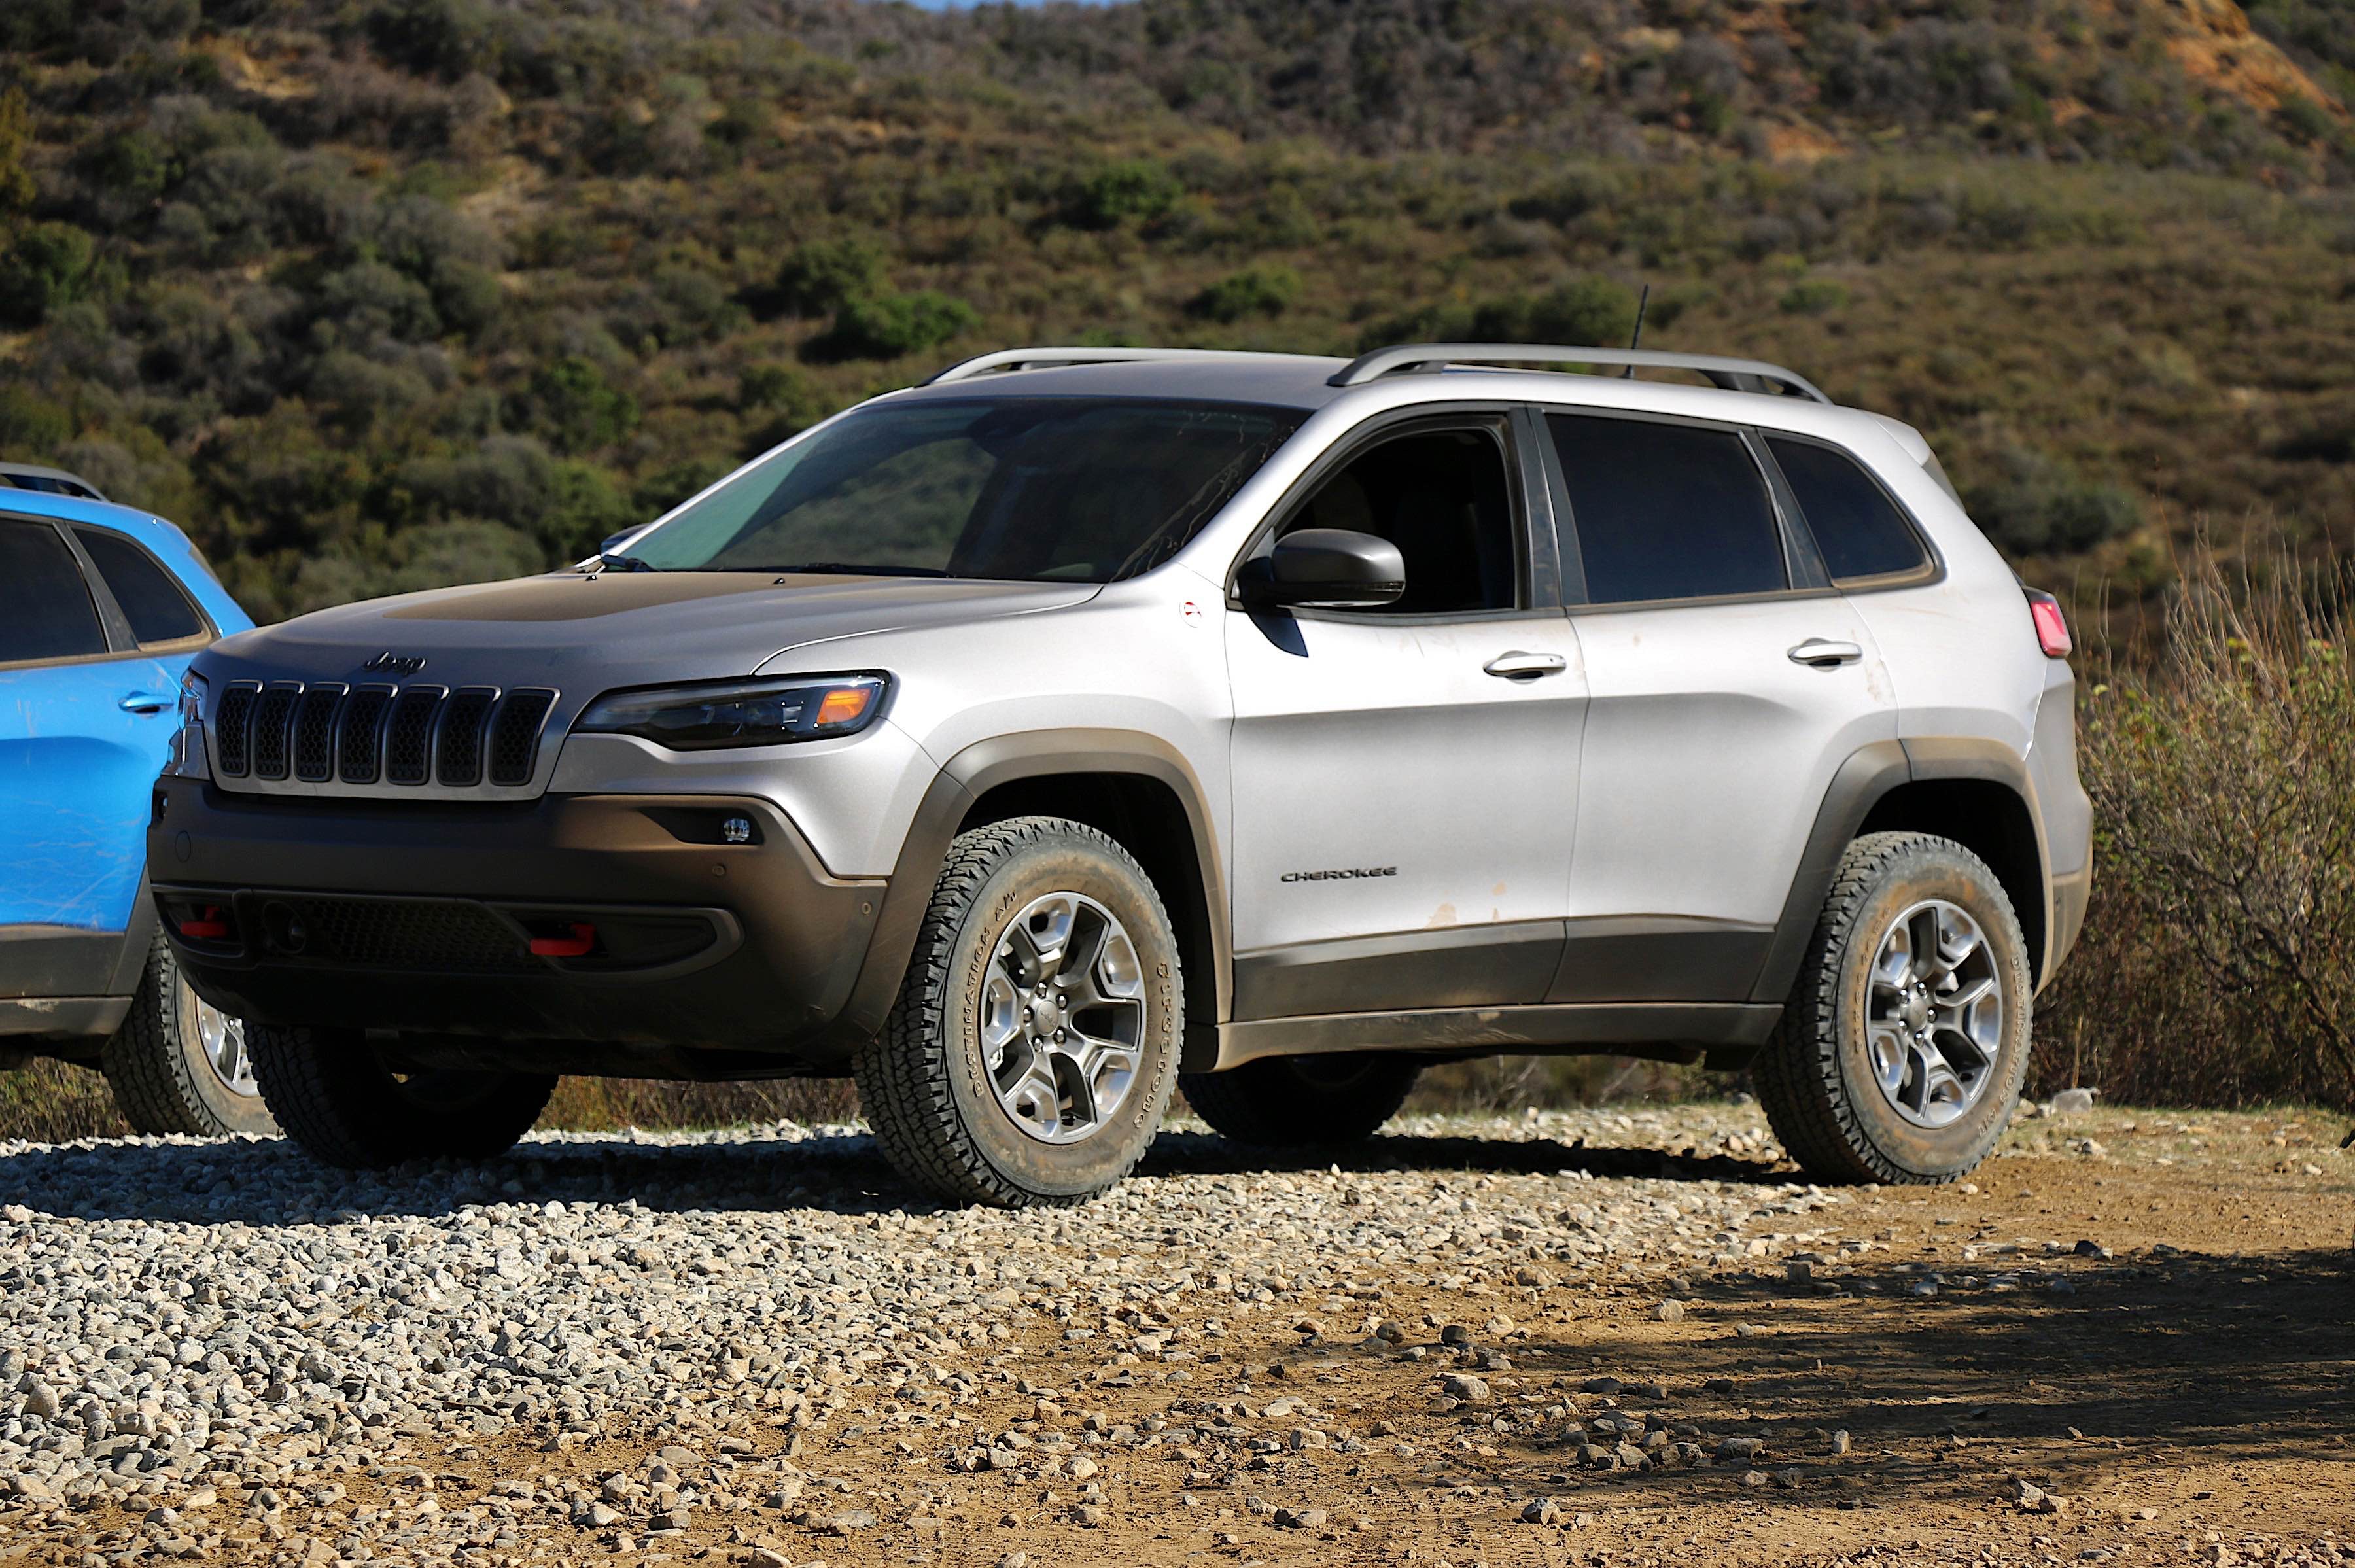 Jeep Cherokee hd specifications